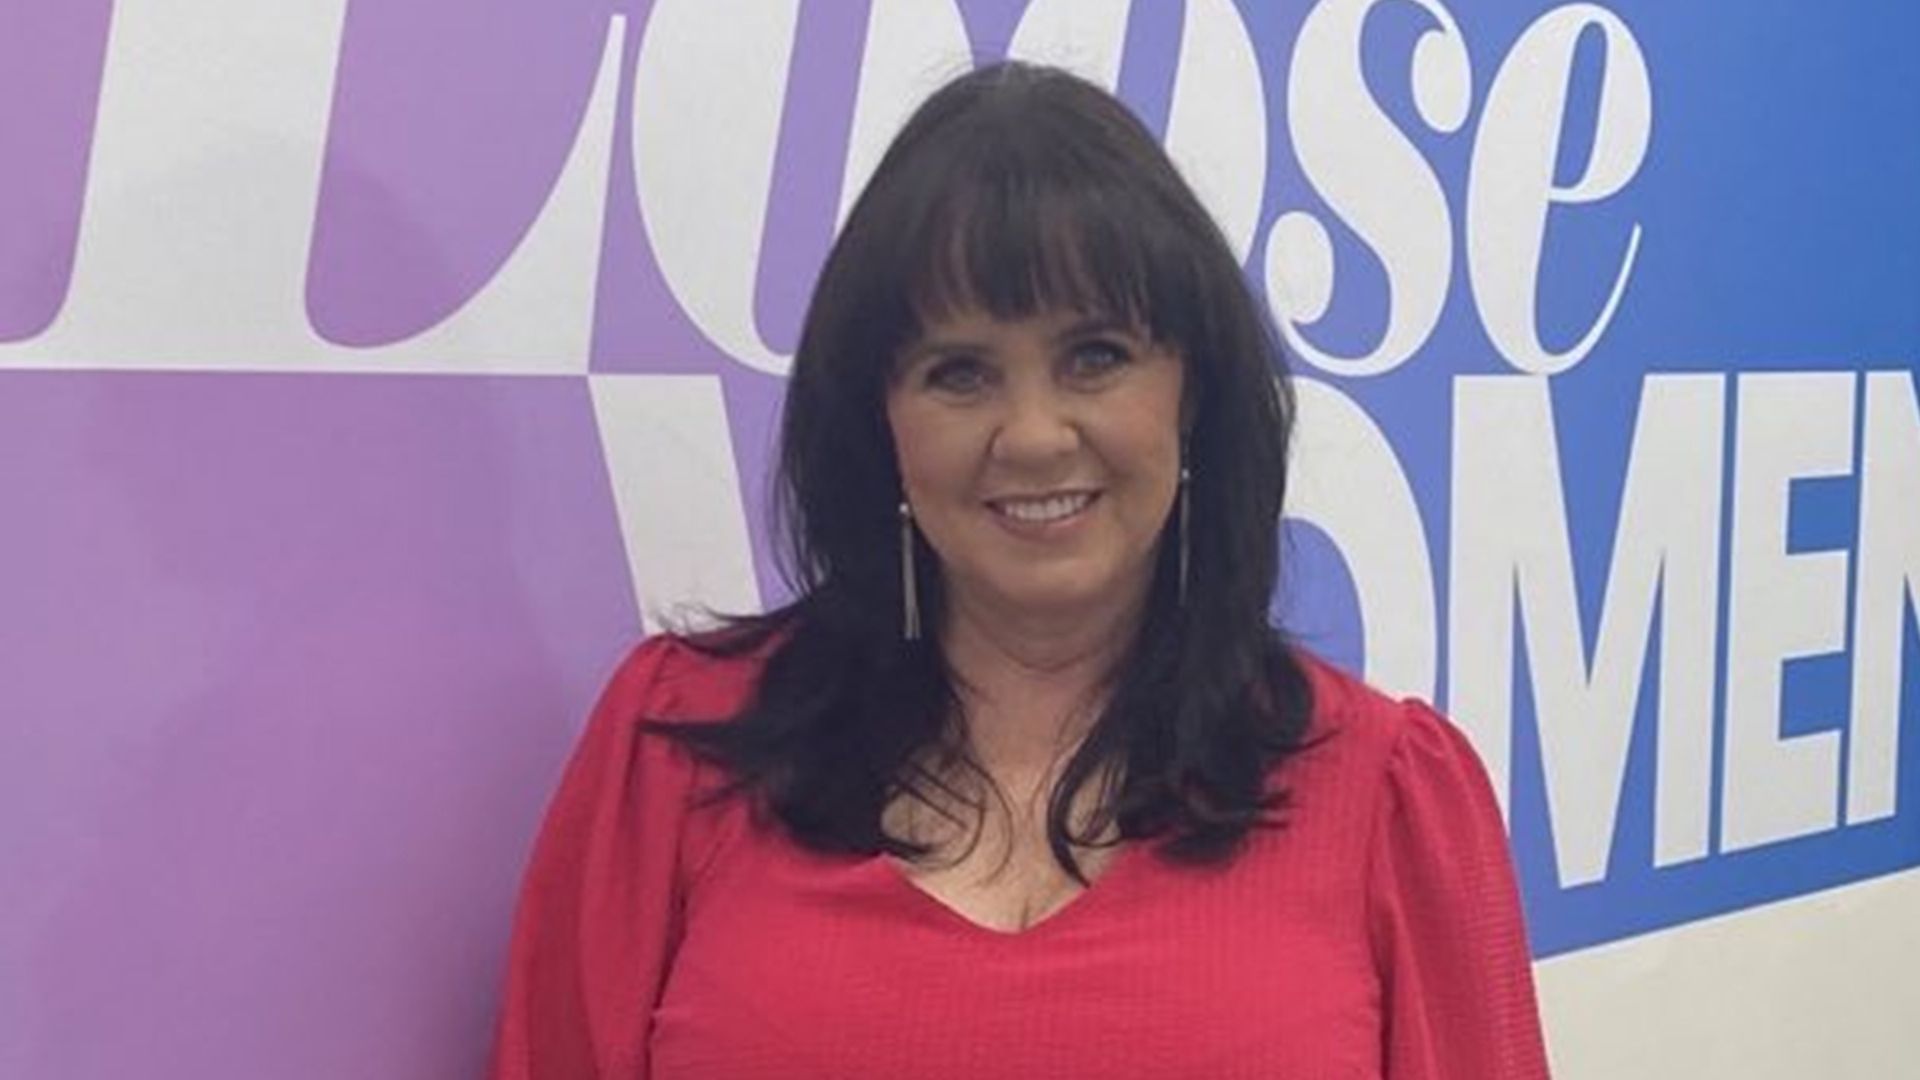 Loose Womens Coleen Nolan Looks So Glamorous In Special Photo Alongside Lookalike Daughter Hello 6379